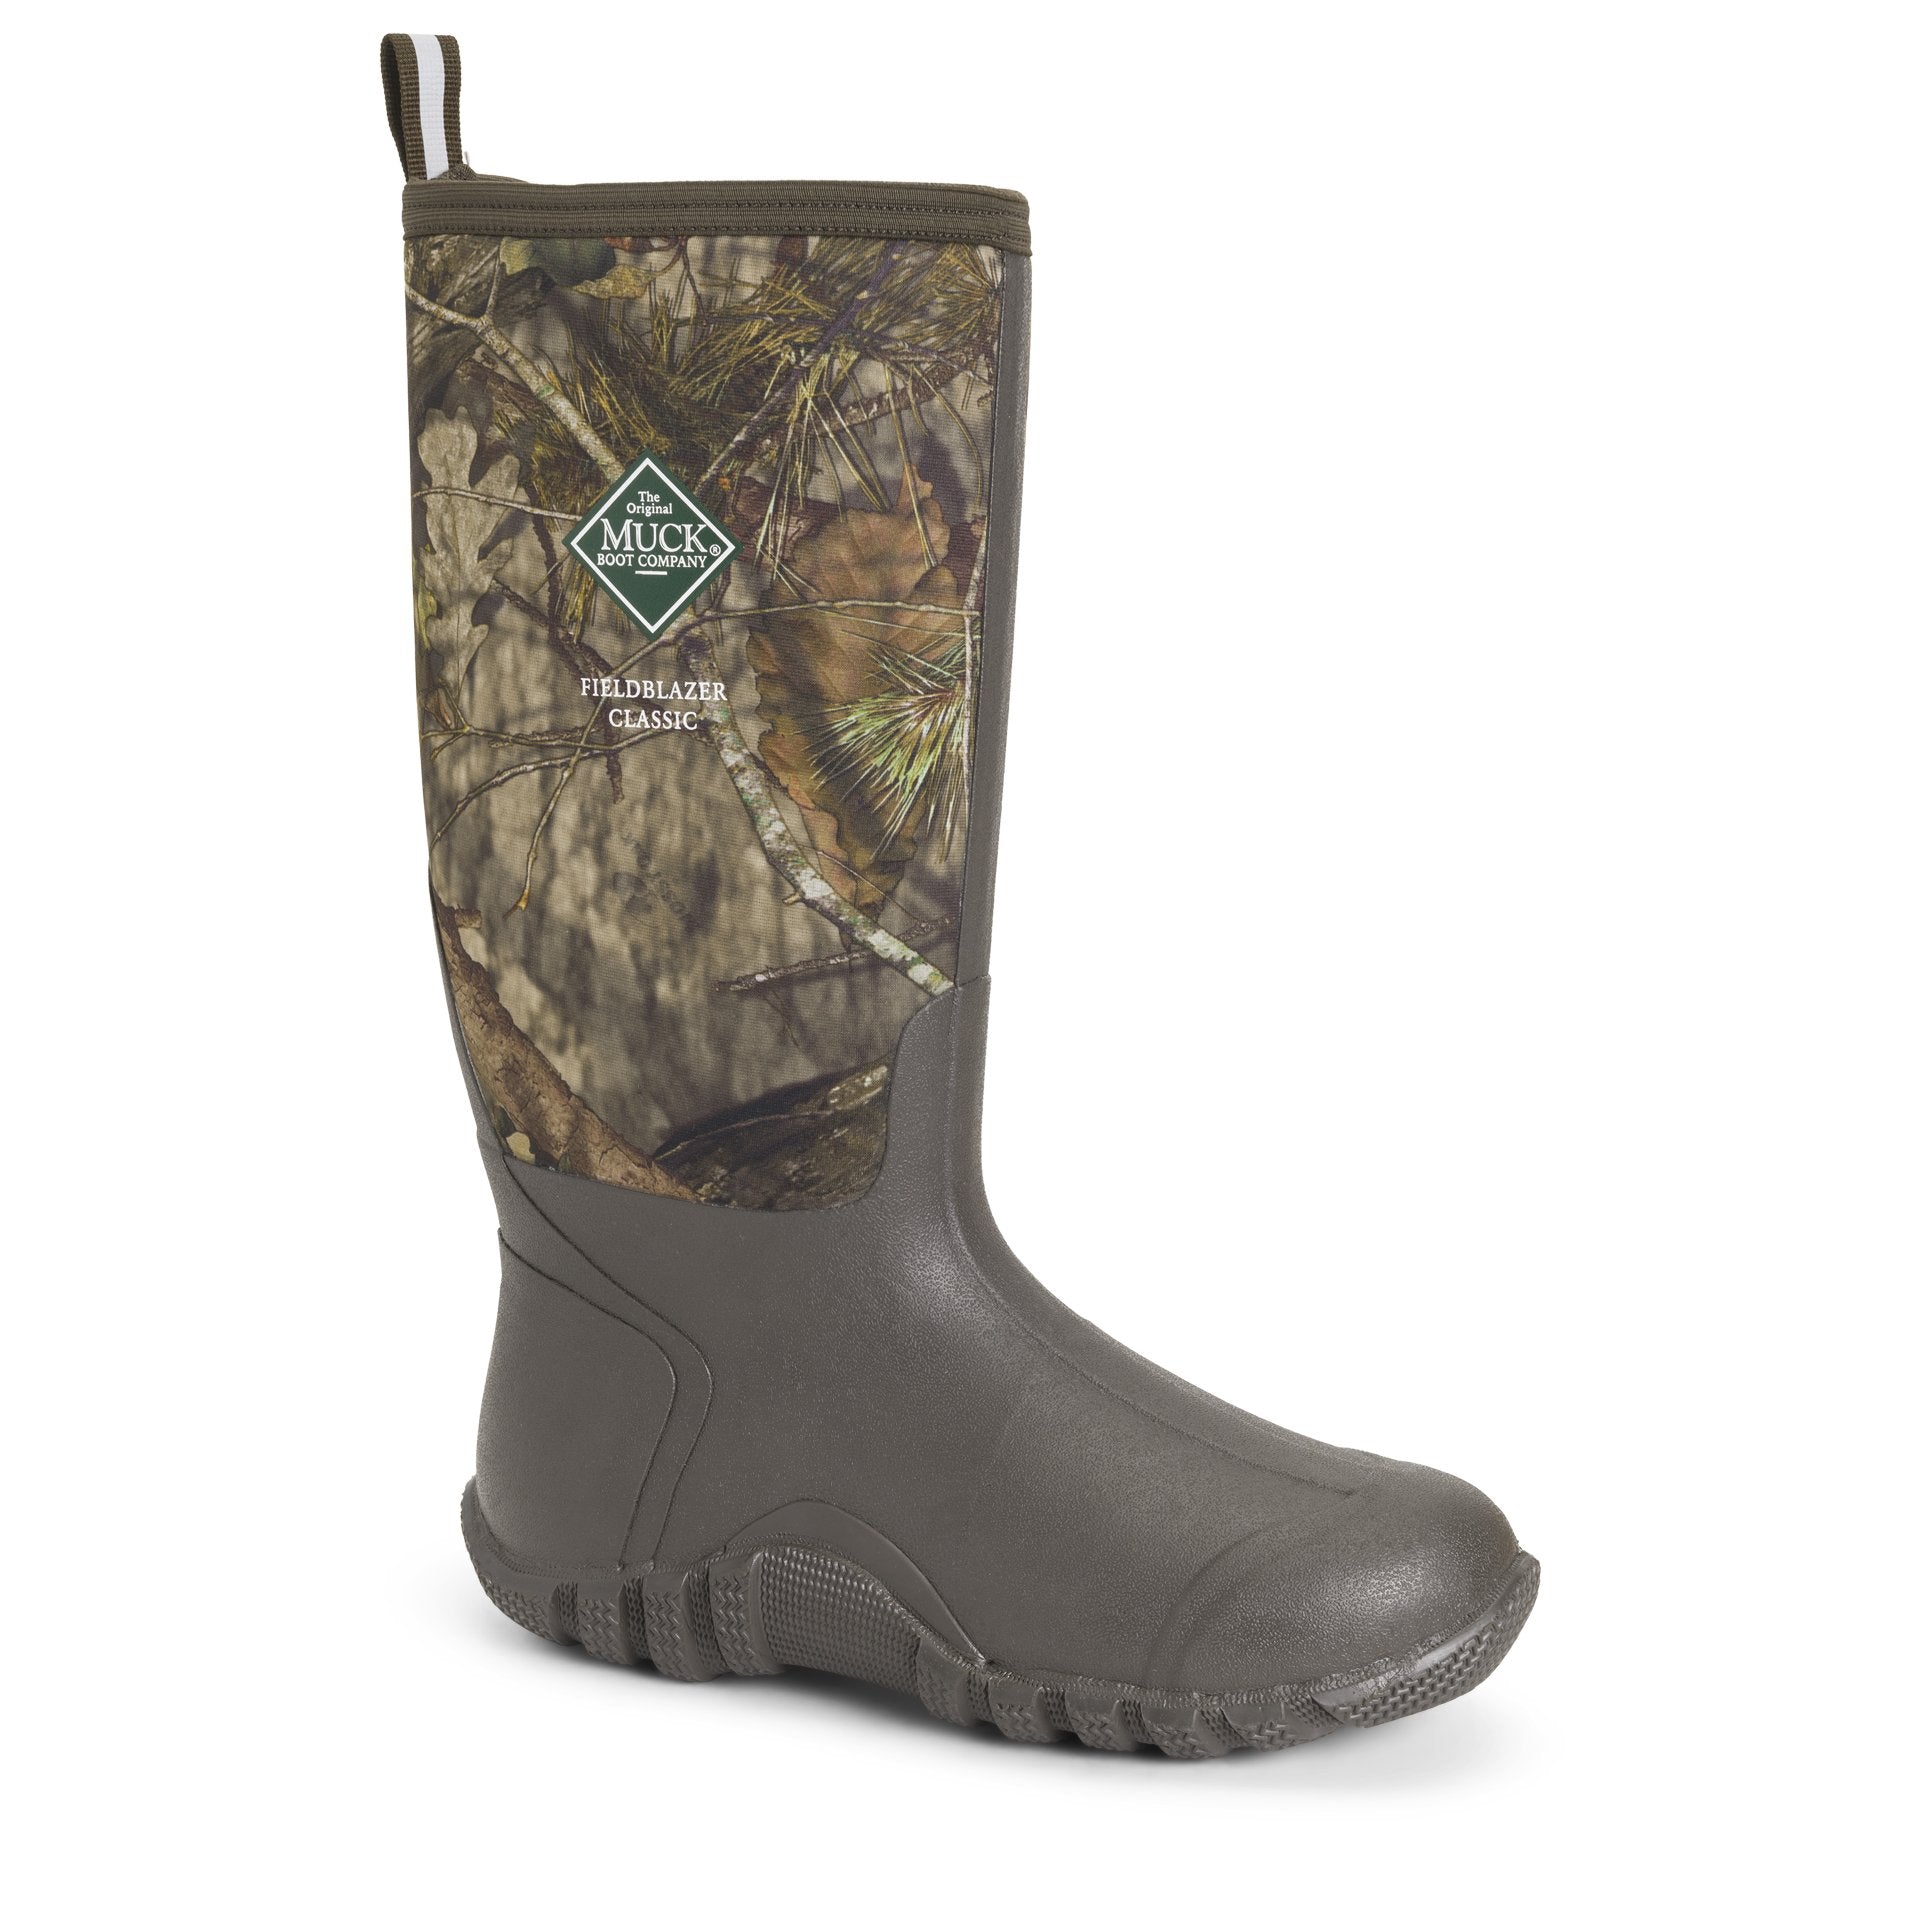 teal and camo muck boots